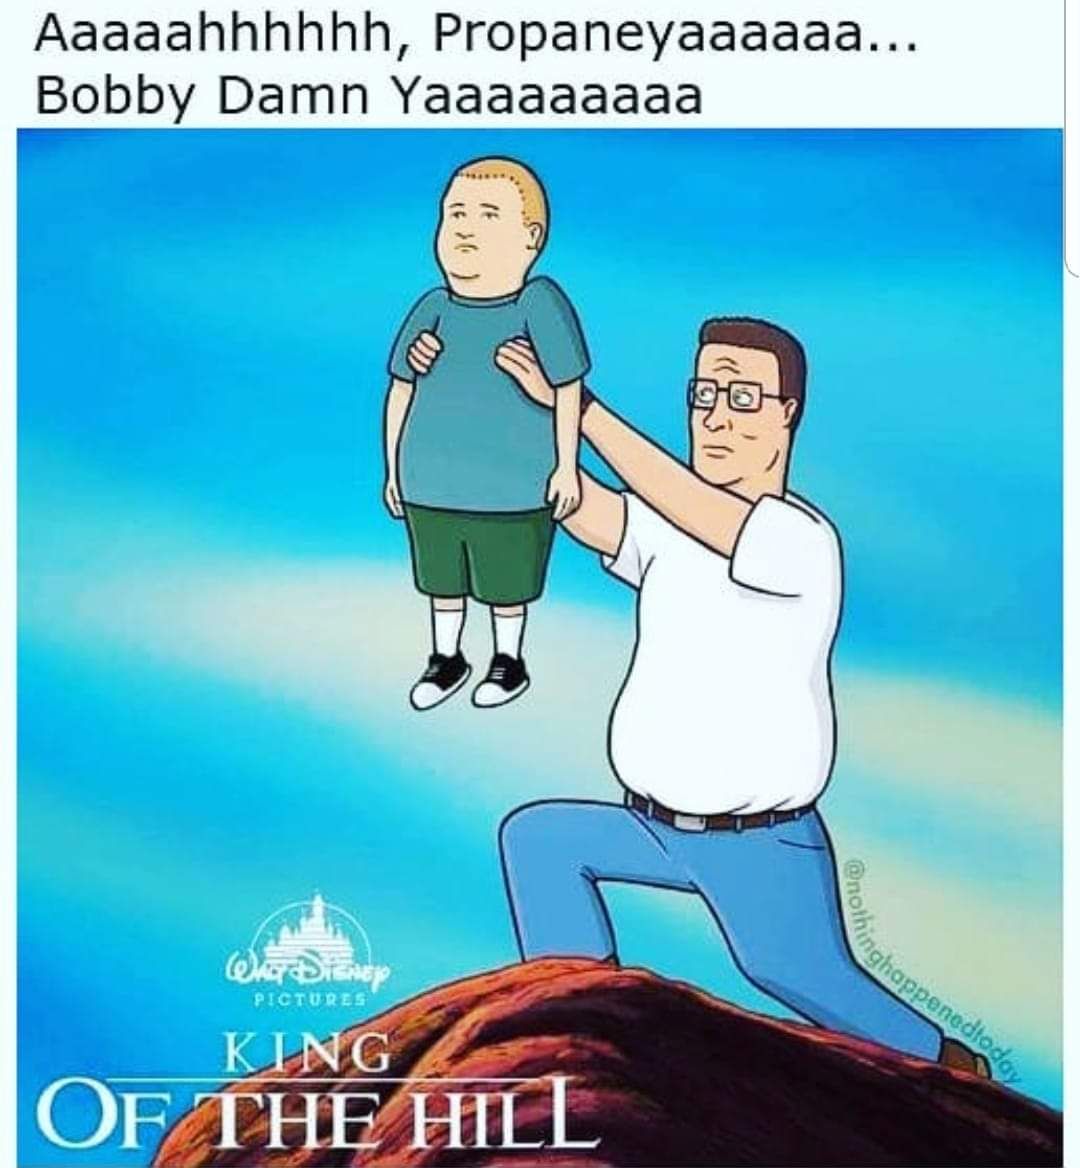 Everything the light touches can be powered by clean burning propane